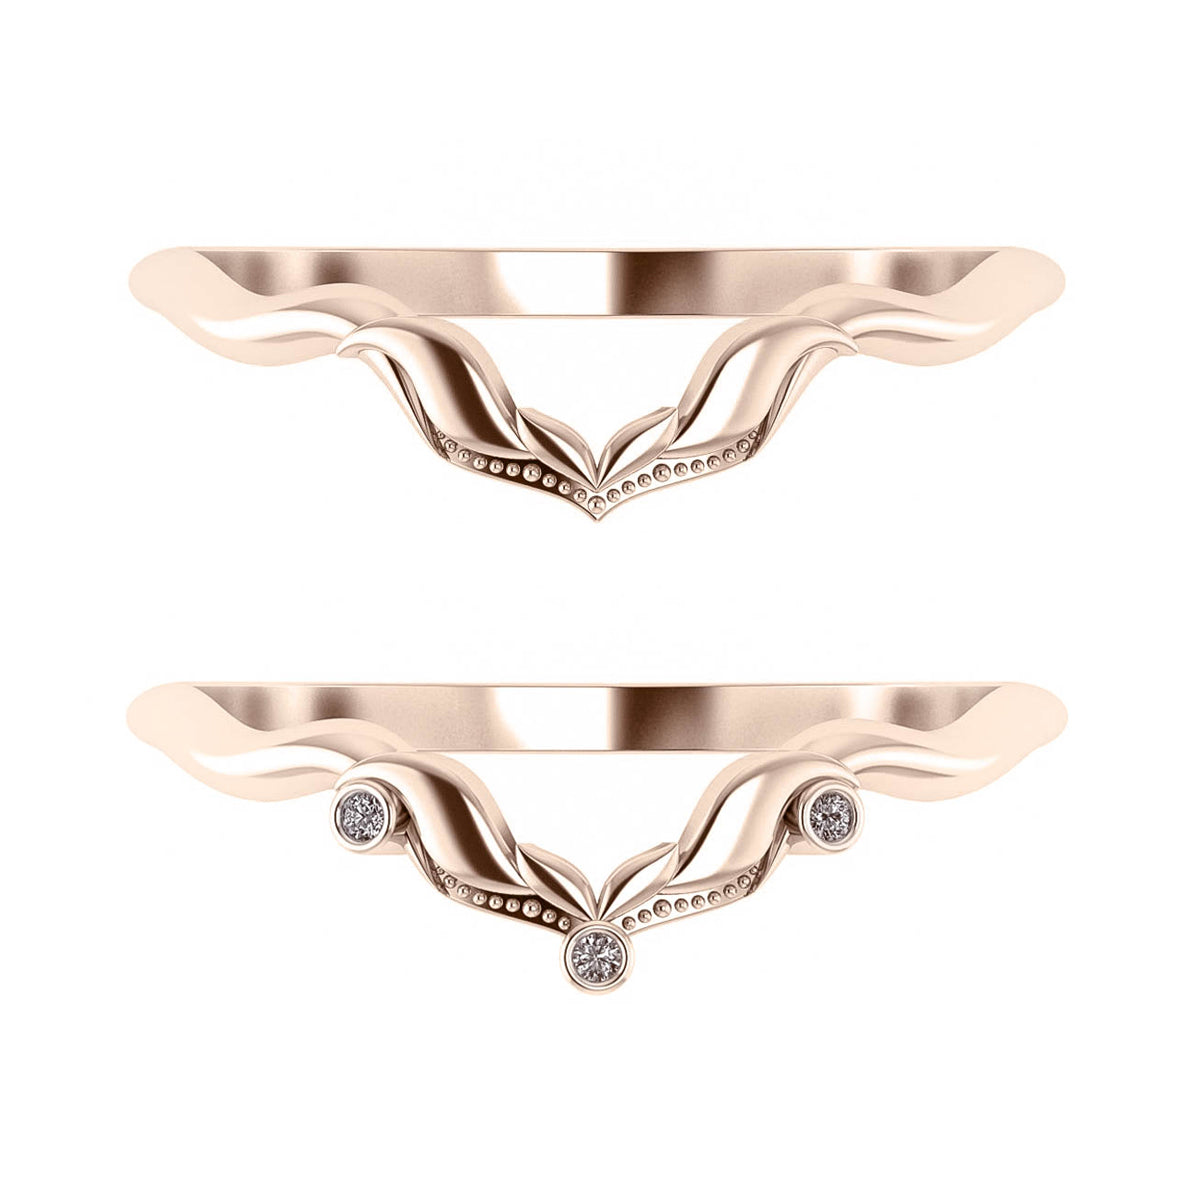 Matching wedding band for small Lida: choose yours - Eden Garden Jewelry™